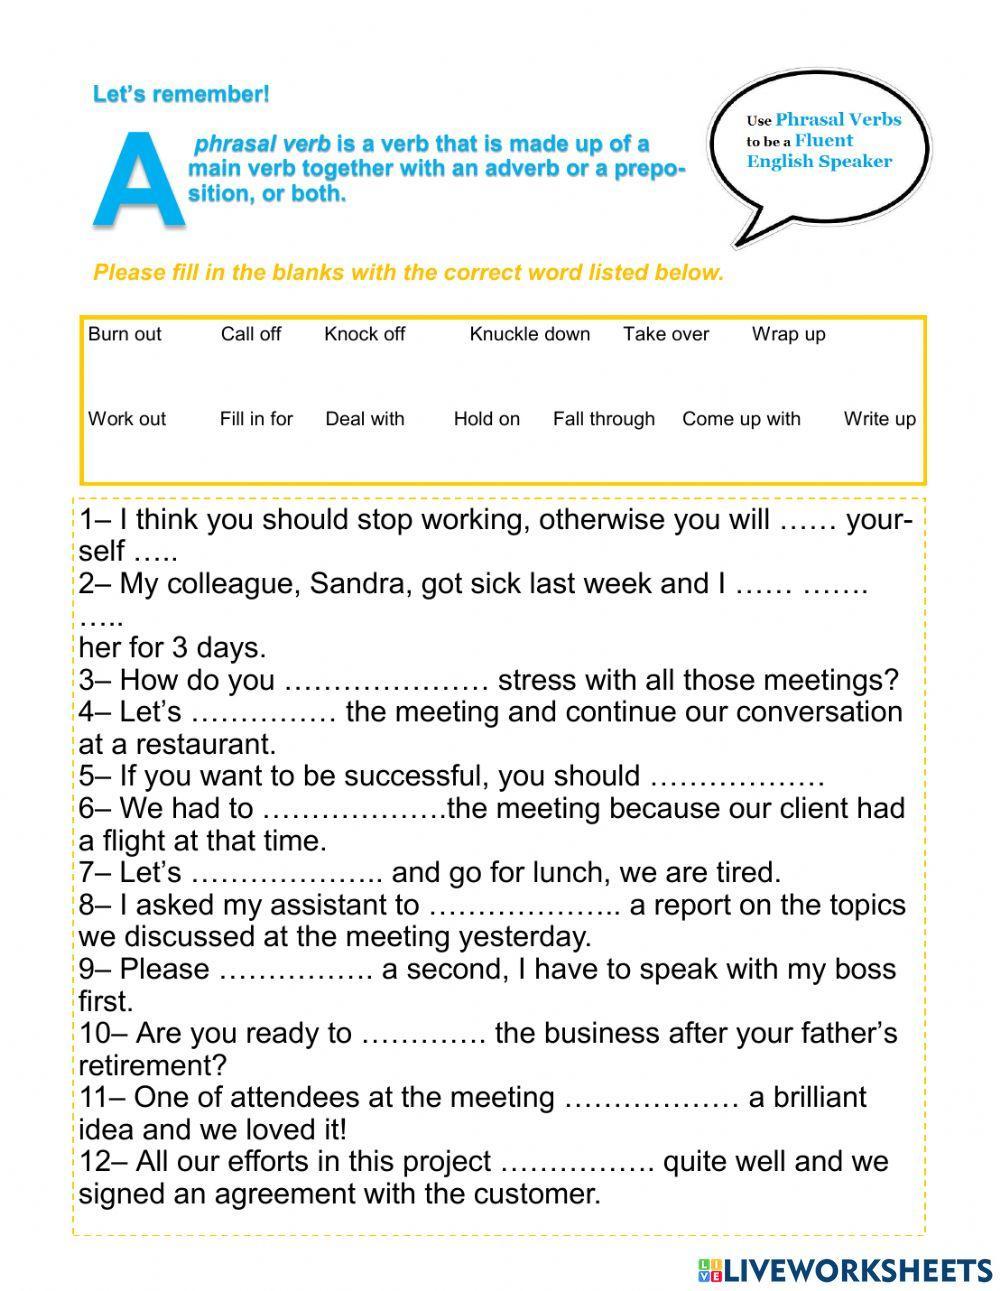 Phrasal Verbs for Business